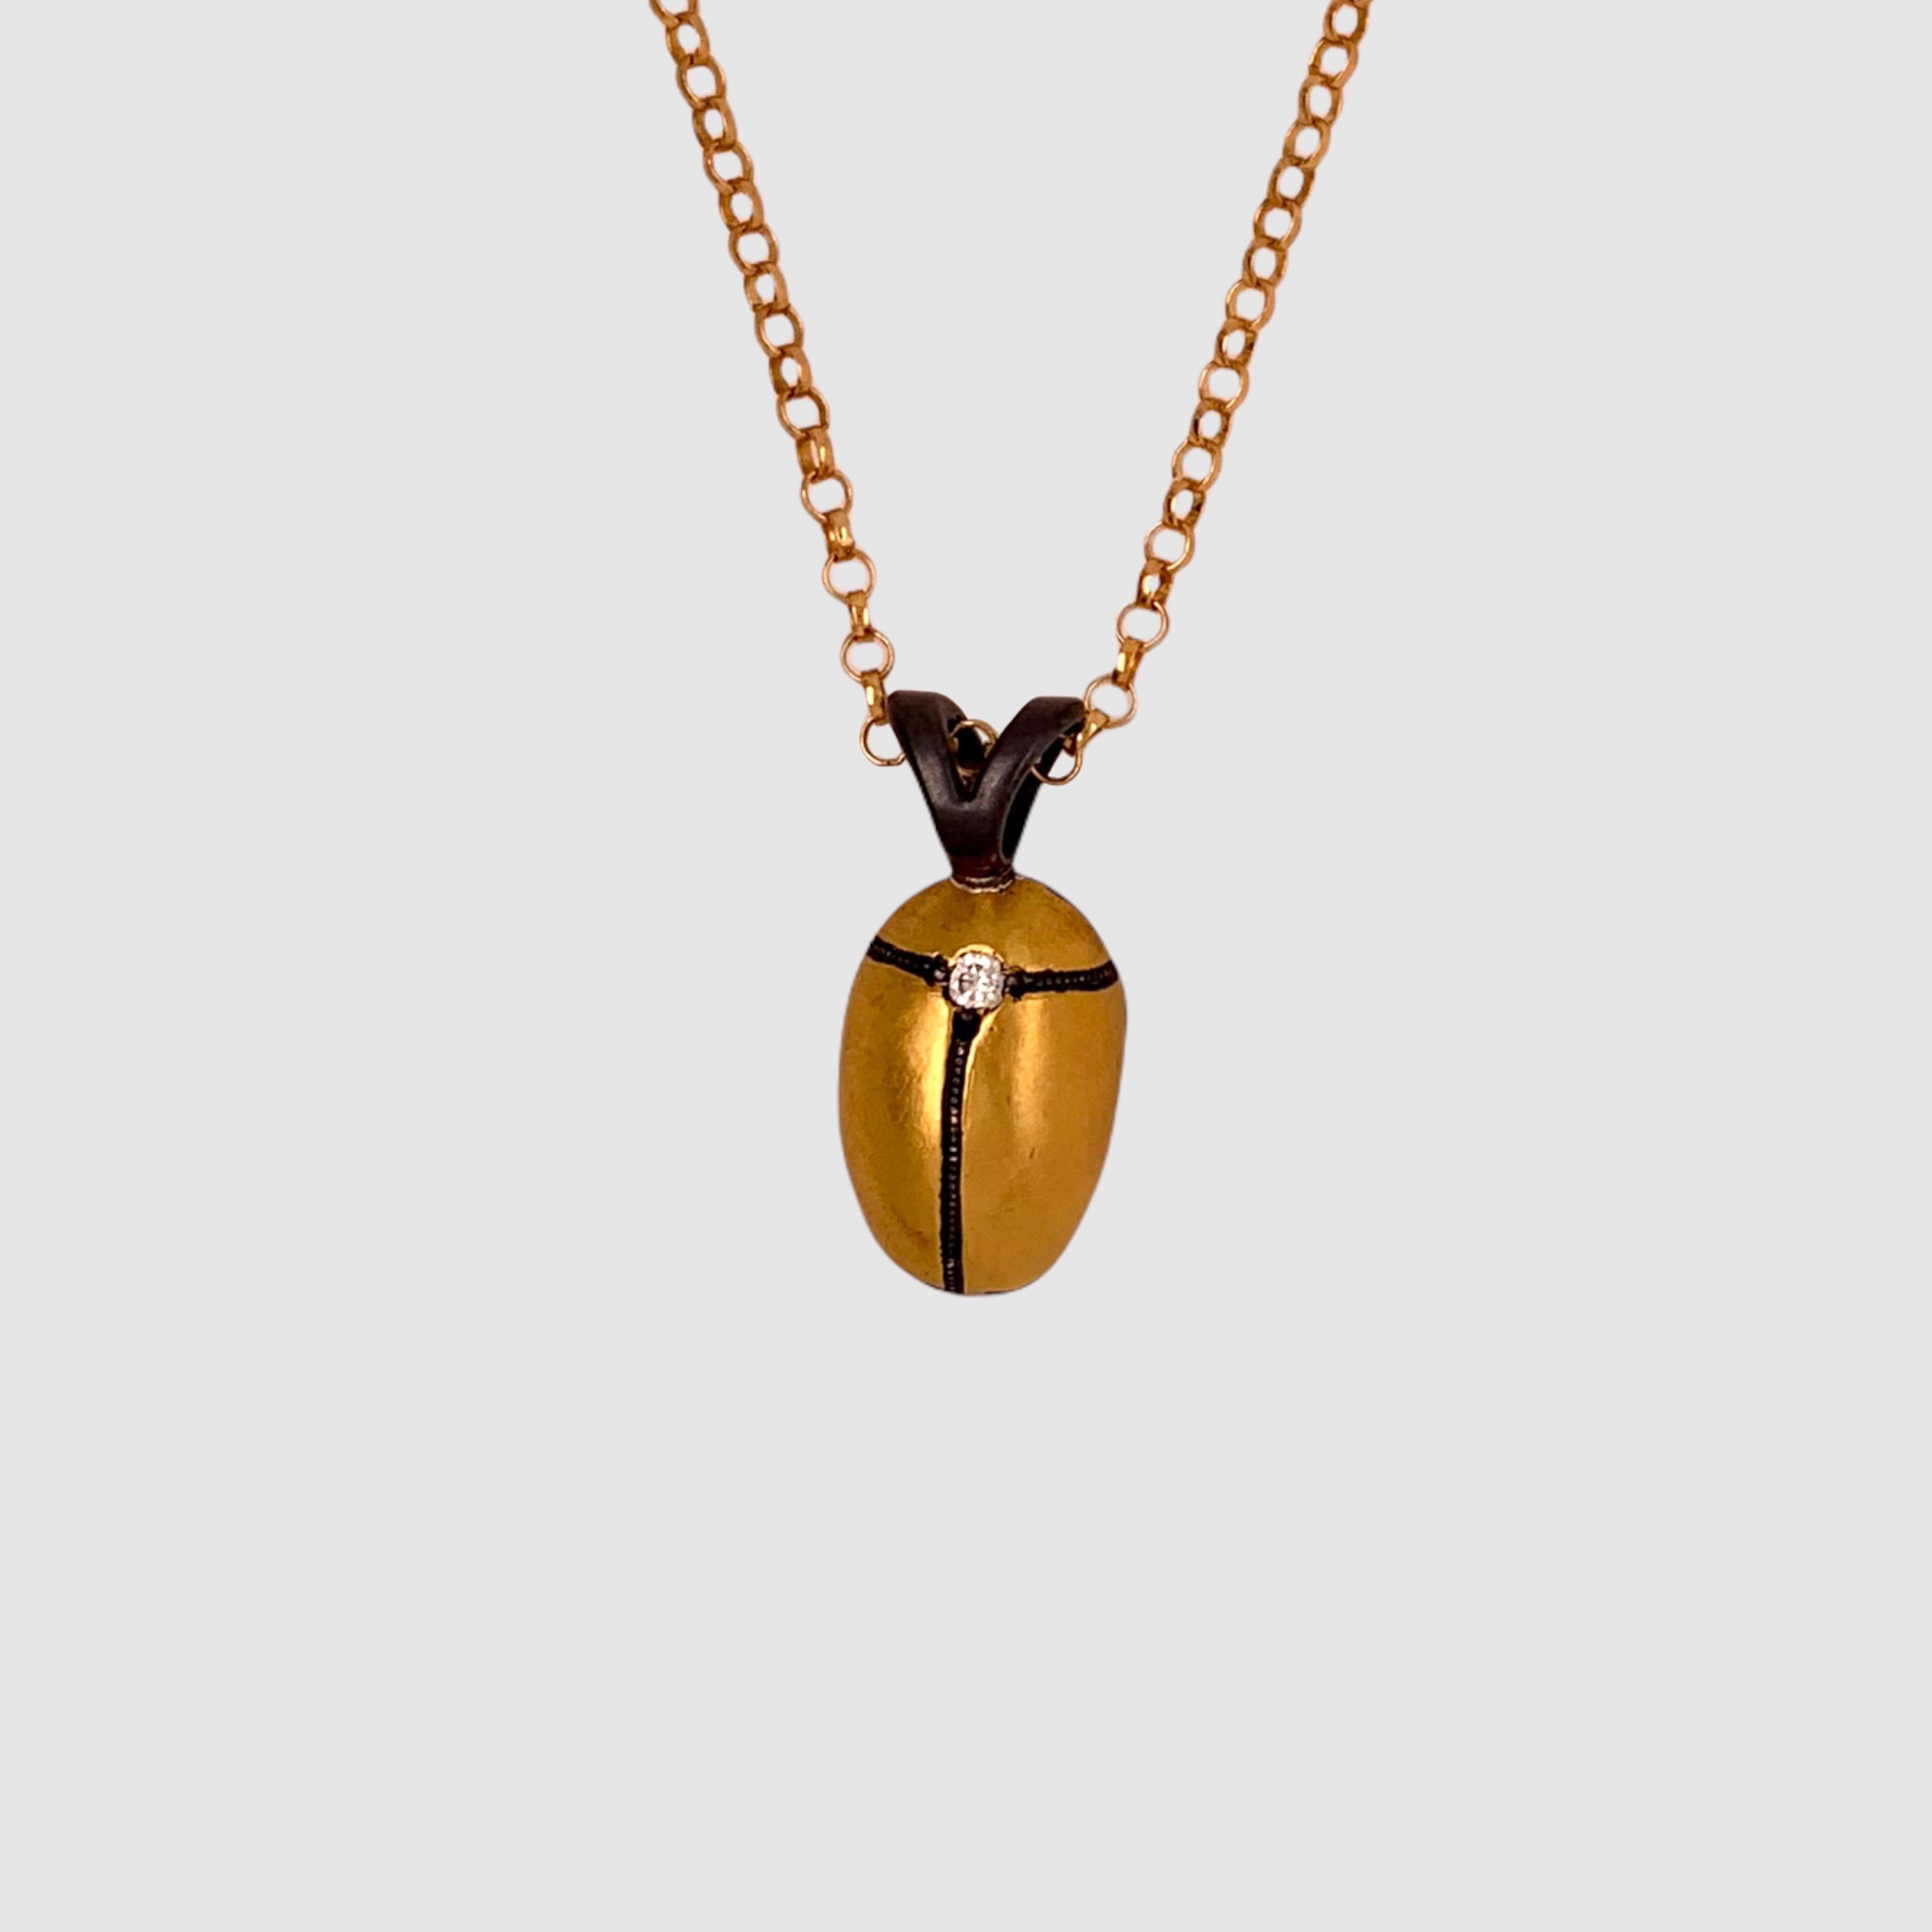 SACRED SCARAB NECKLACE //  # 12  // RECYCLED DIAMOND